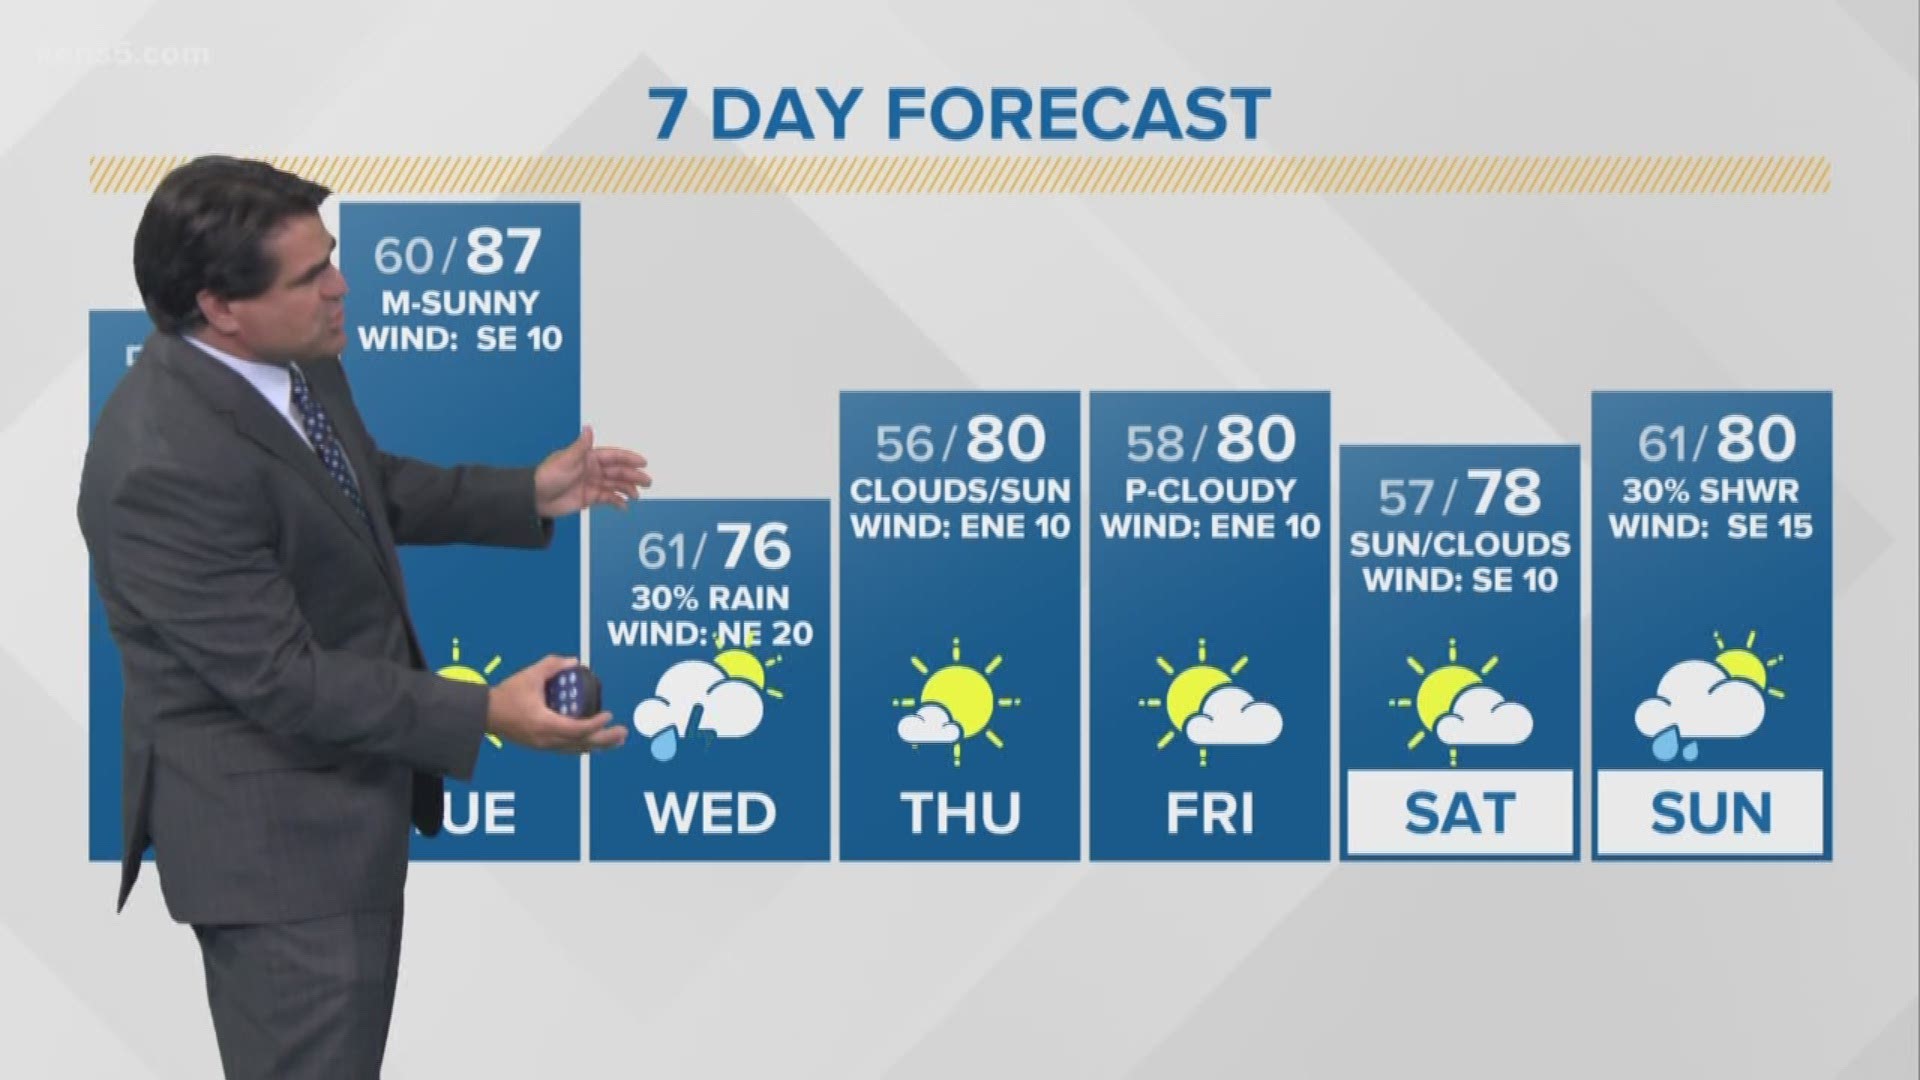 Meteorologist Paul Mireles has the full forecast, which includes a cool-down coming from a front on Wednesday